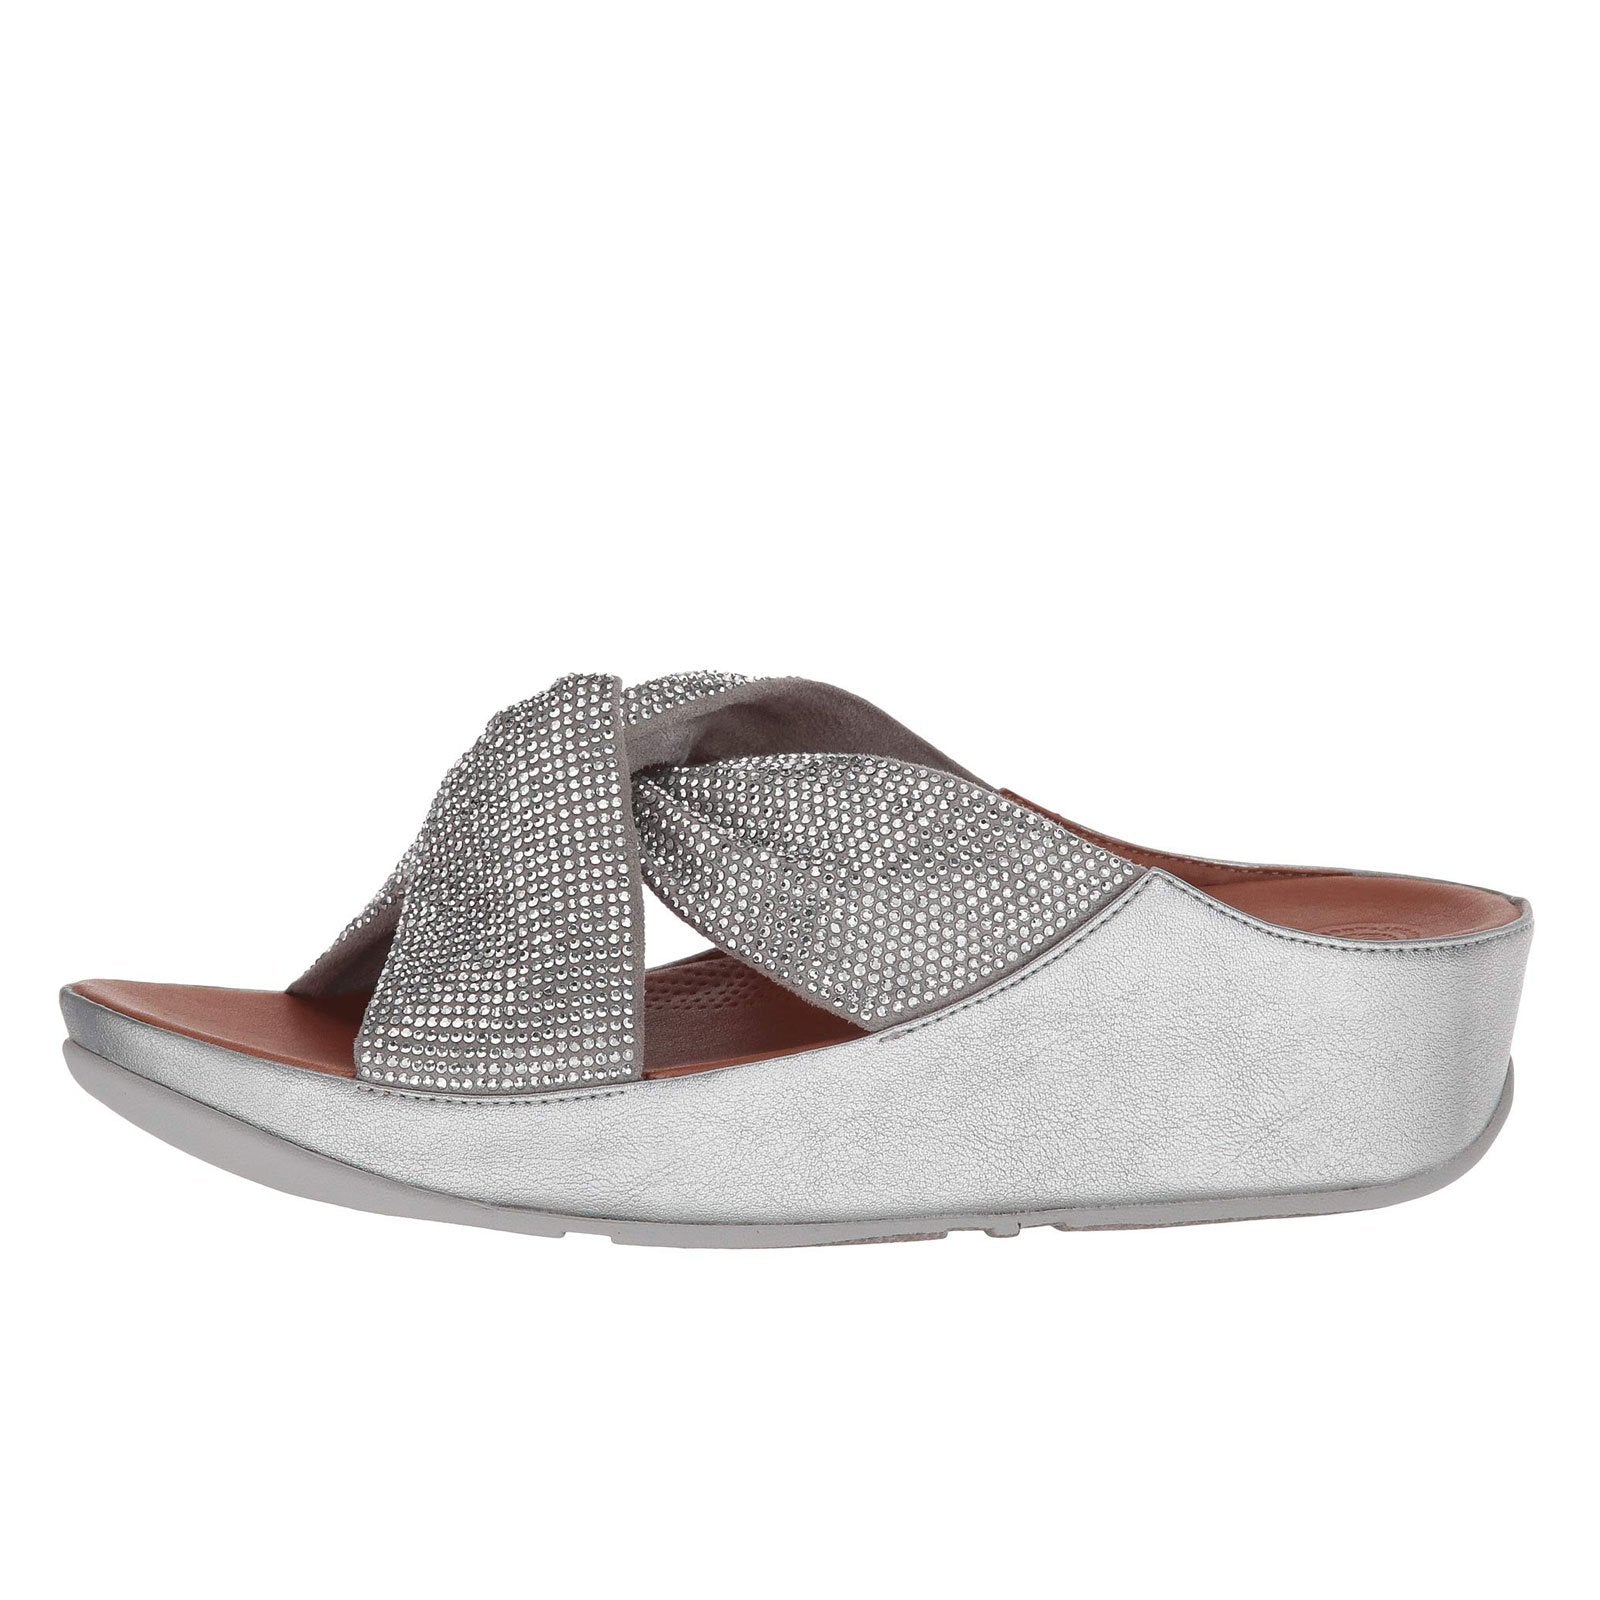 Fitflop Twiss Crystal Silver Toe Post Sandals in Metallic